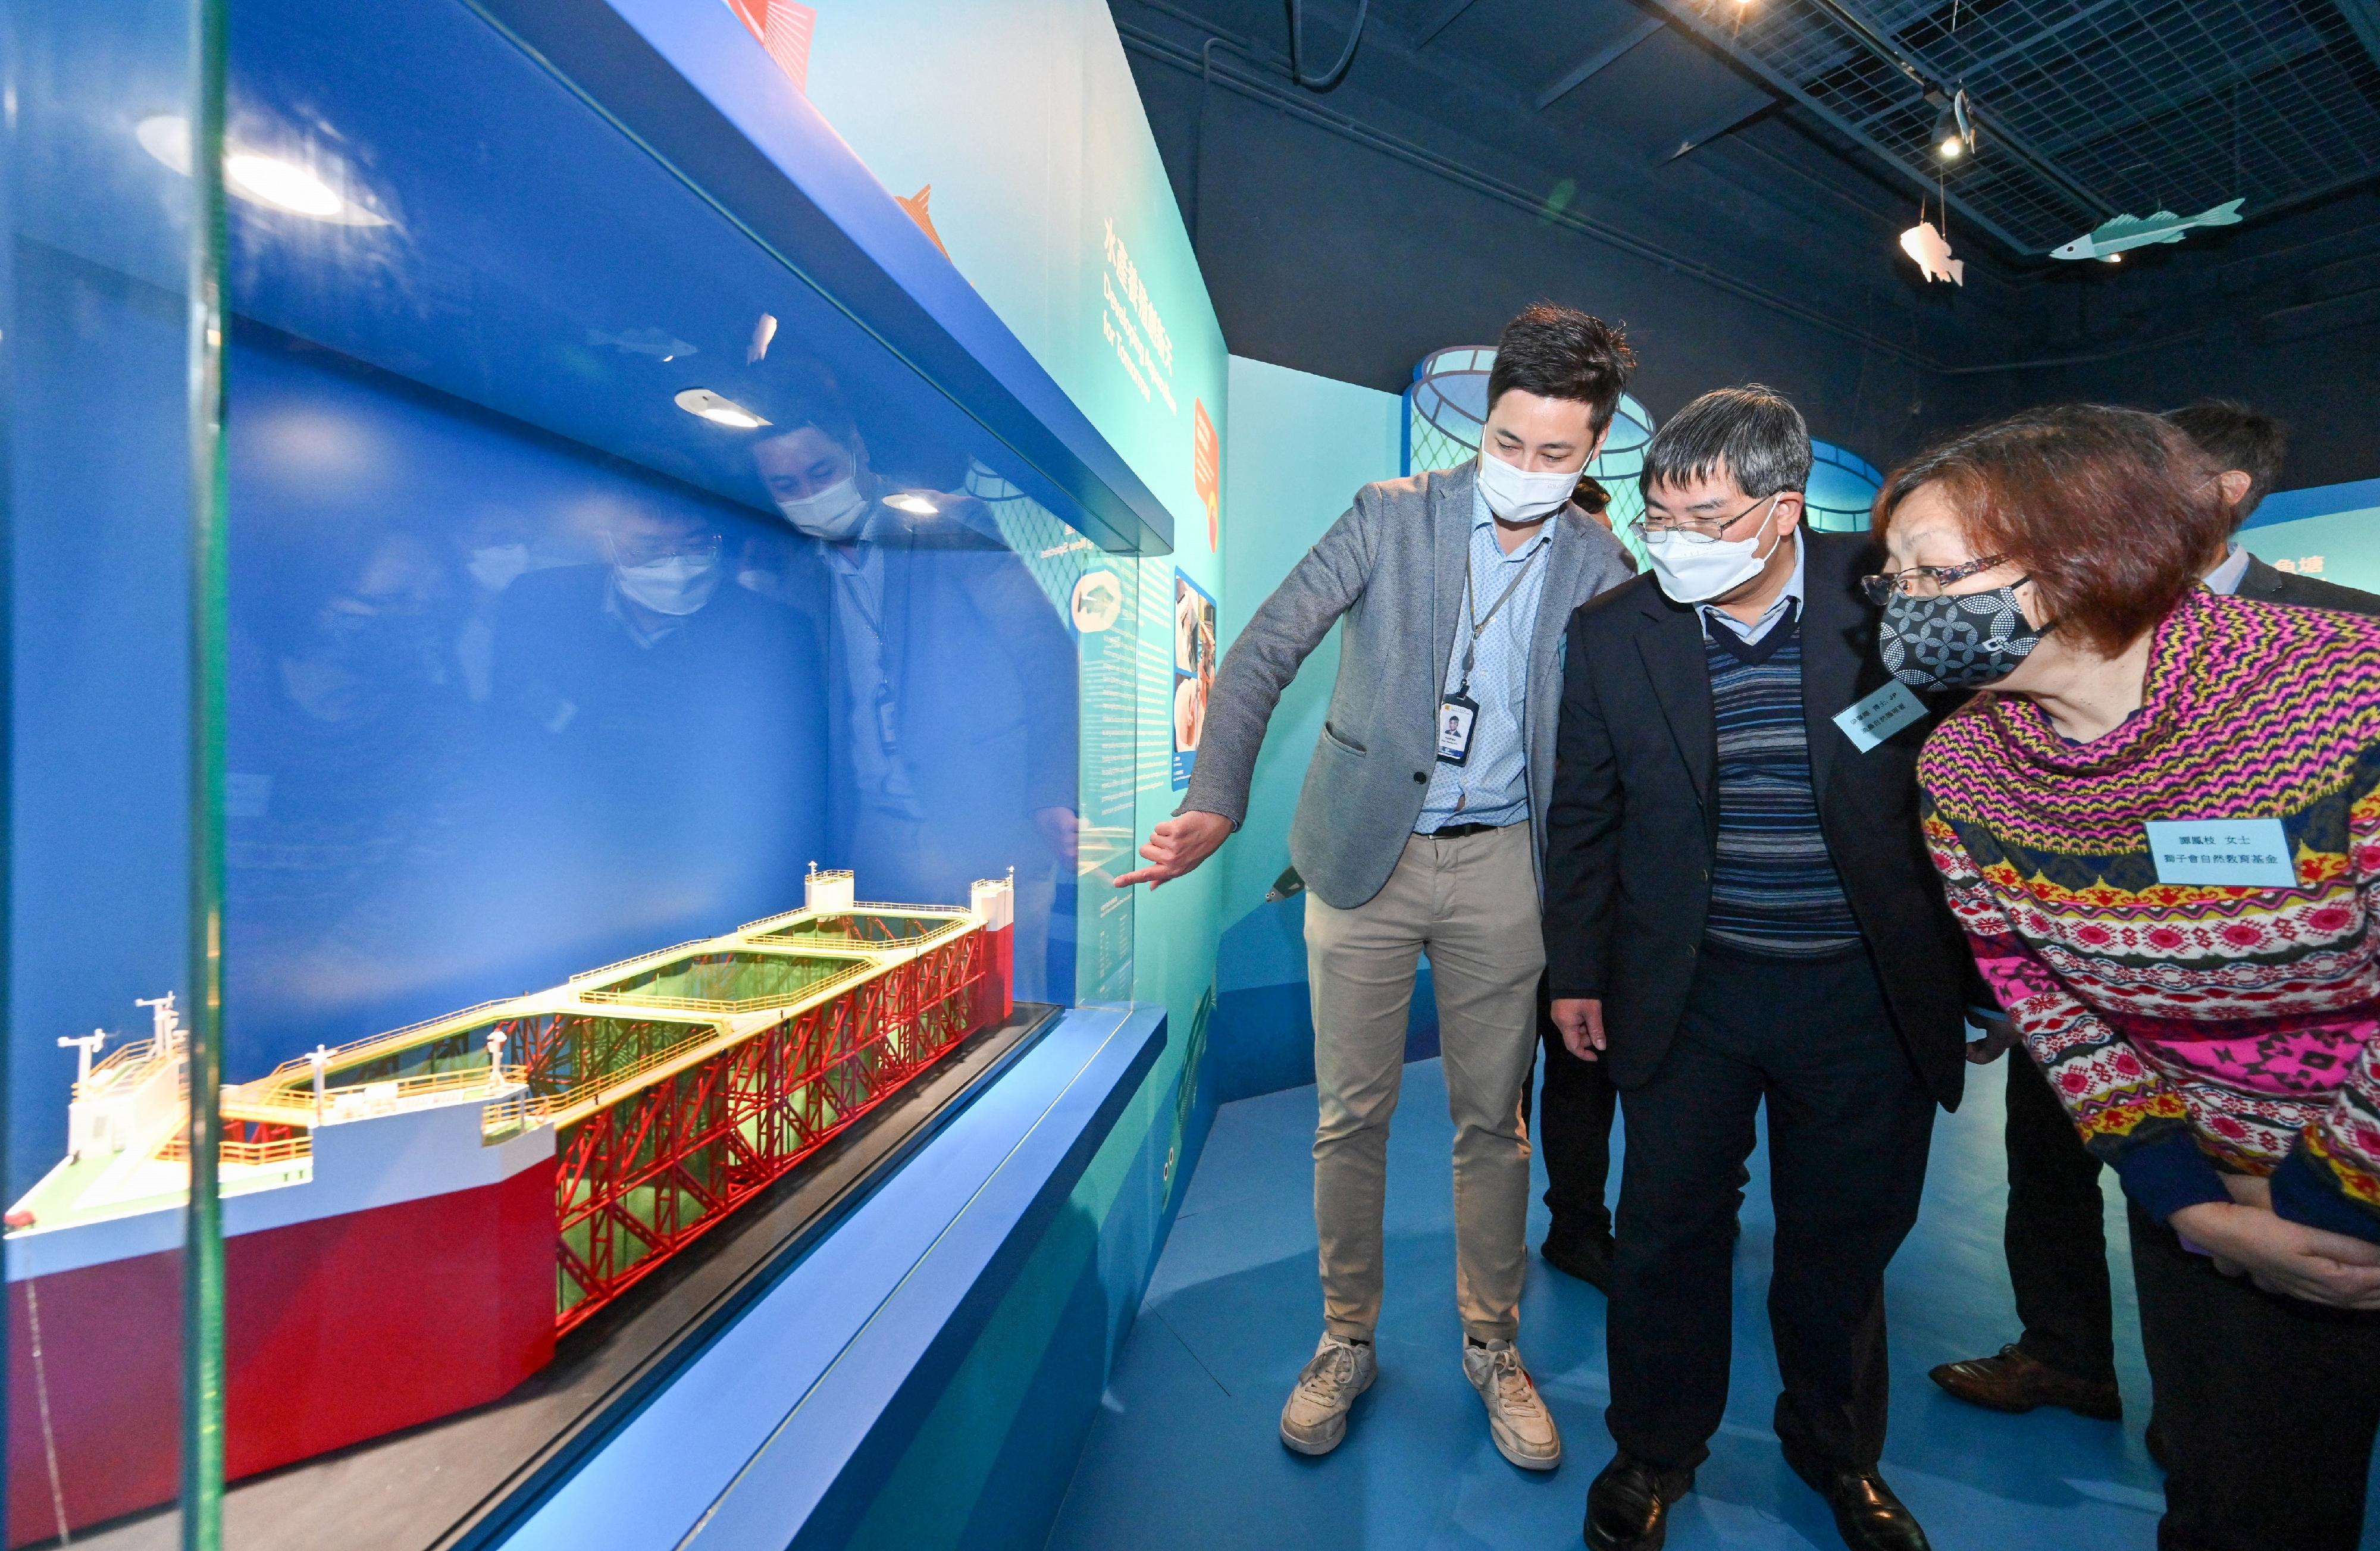 The Fisheries Hall located at the Lions Nature Education Centre at Tsiu Hang, Sai Kung, reopened today (December 16) upon completion of its revamp. Photo shows the Director of Agriculture, Fisheries and Conservation, Dr Leung Siu-fai (second left), Legislative Council Member Mr Steven Ho (first left) and other guests viewing a miniature model of a semi-submersible steel truss cage farm.